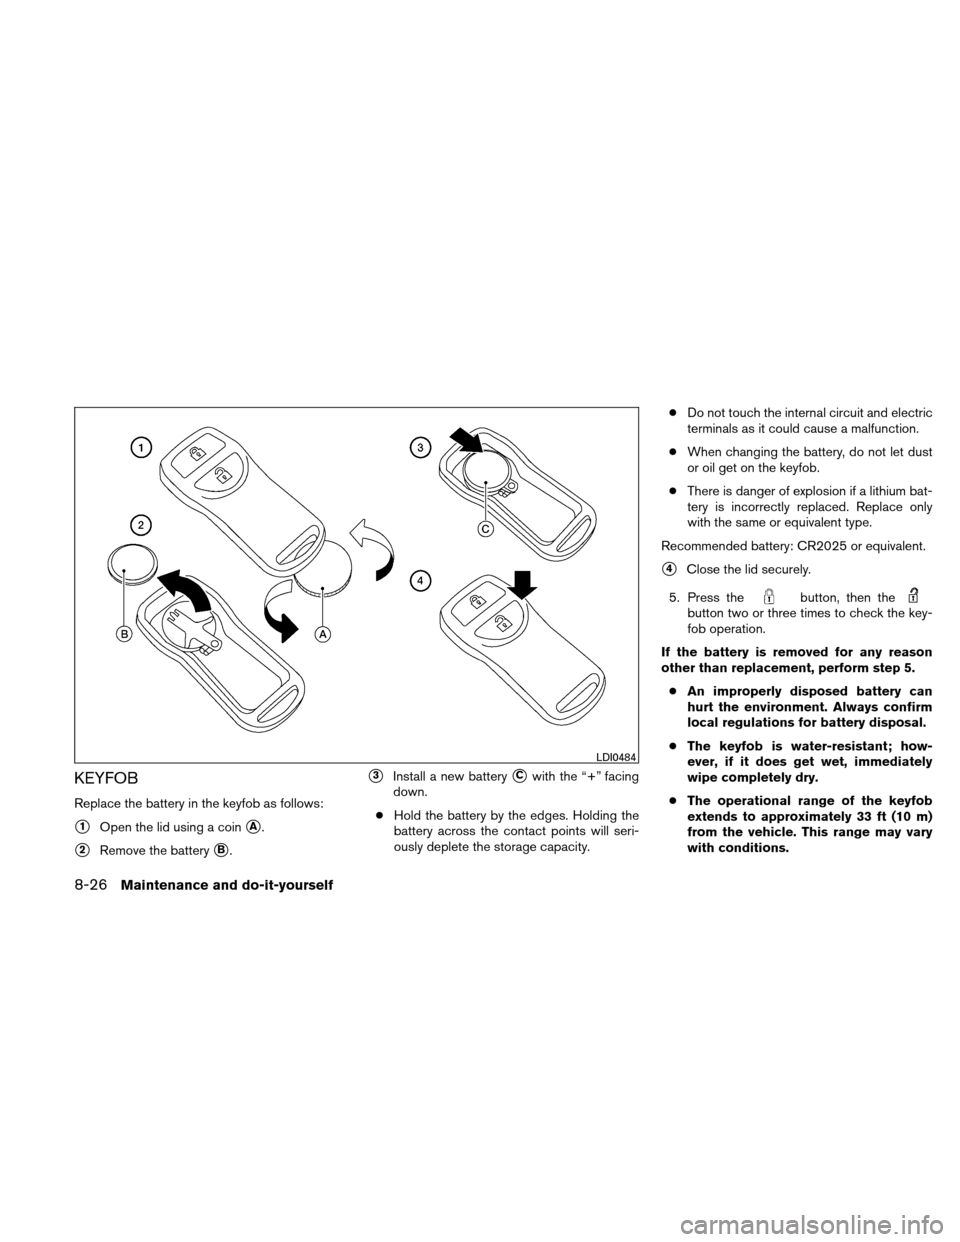 NISSAN XTERRA 2011 N50 / 2.G Owners Manual KEYFOB
Replace the battery in the keyfob as follows:
1Open the lid using a coinA.
2Remove the batteryB.
3Install a new batteryCwith the “+” facing
down.
● Hold the battery by the edges. Ho